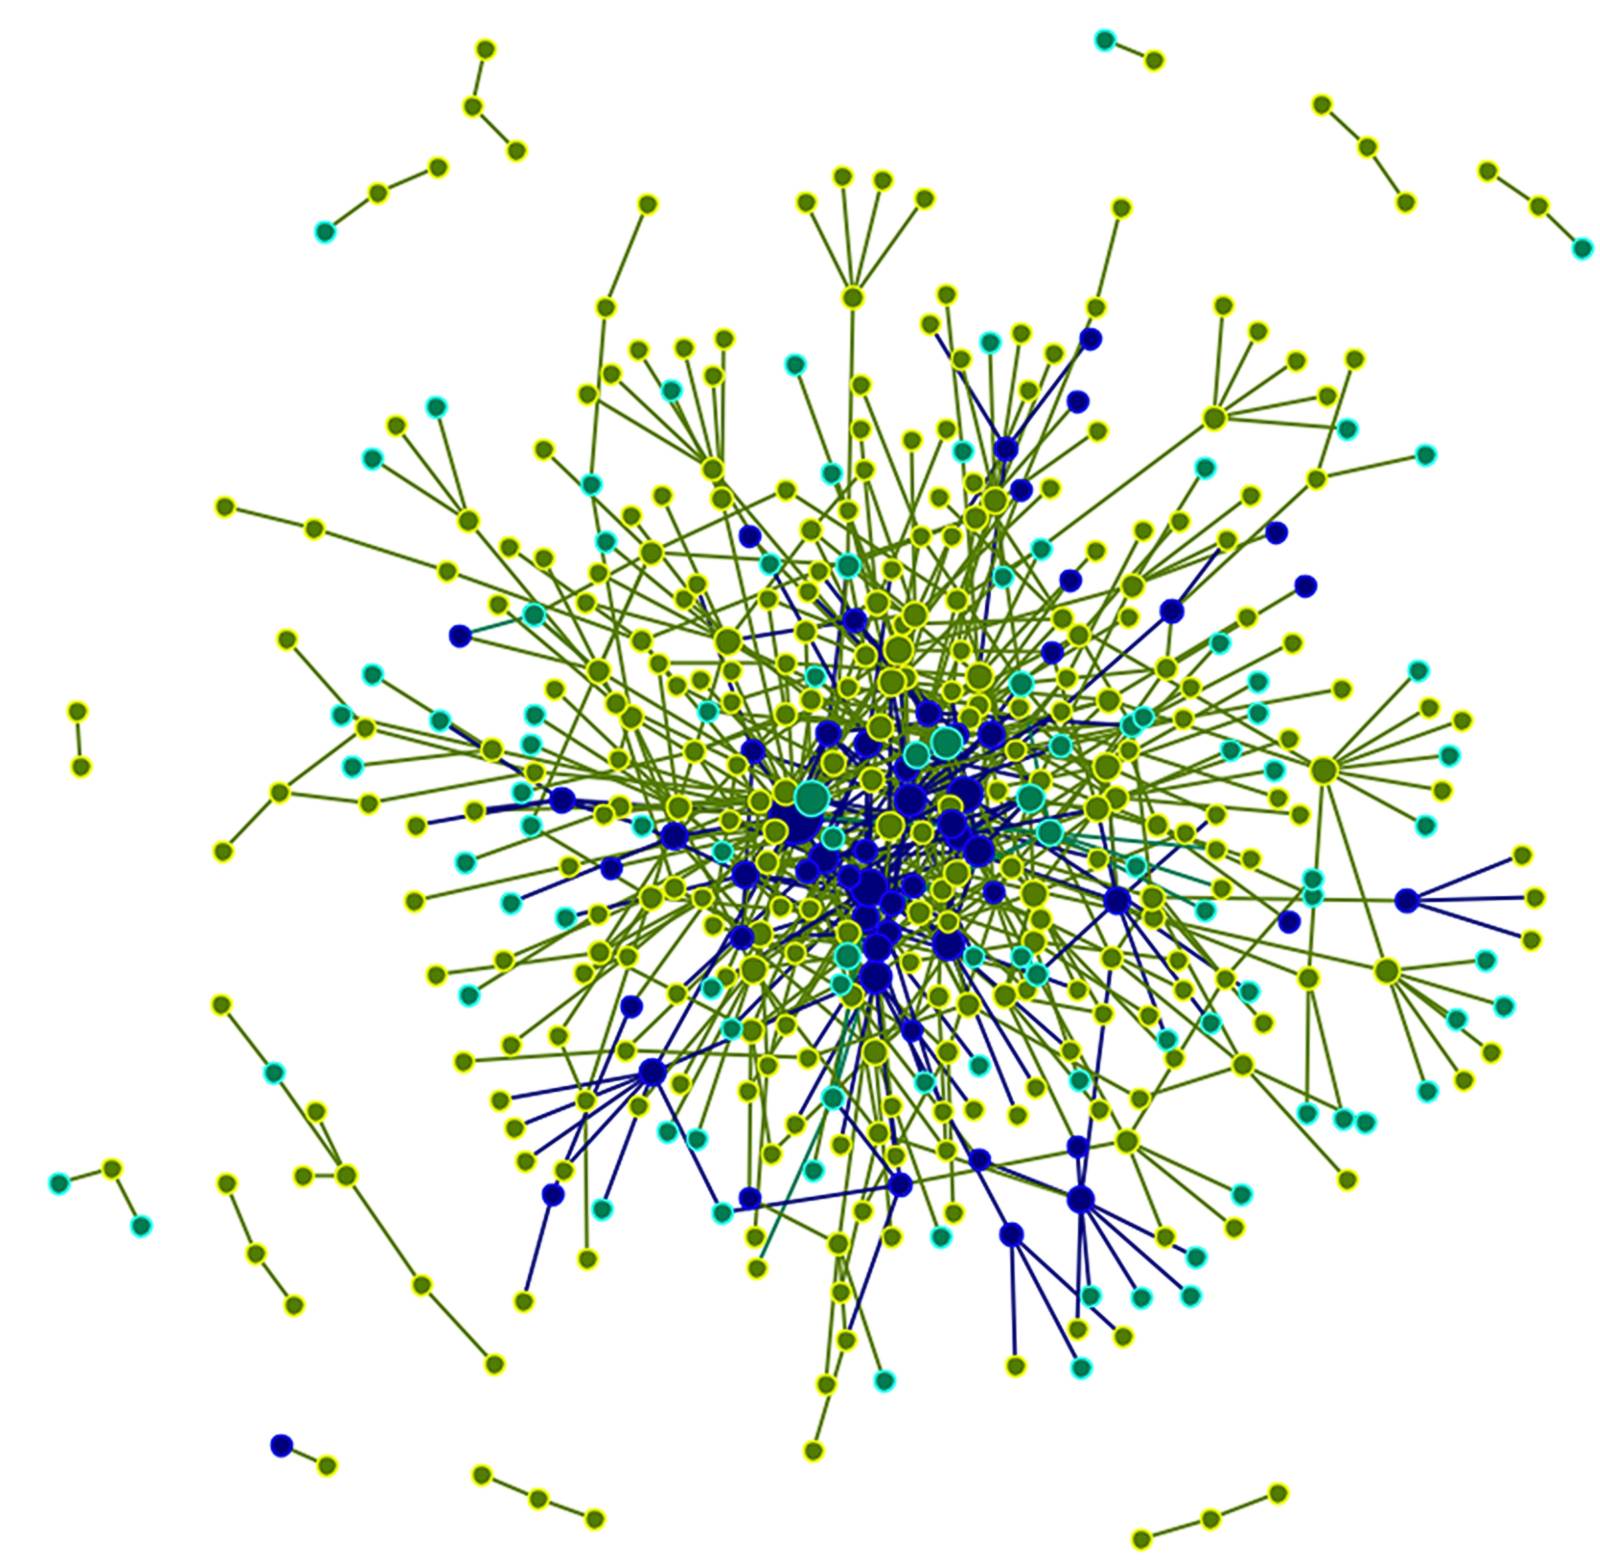 Lodi's knowledge network. Nodes represent individuals and ties represent knowledge-sharing relationships. Green nodes represent individuals who are exclusively growers, aqua nodes represent individuals who are exclusively outreach professionals and blue nodes represent individuals who are both growers and outreach professionals (boundary-spanning professionals). Nodes are scaled by total degree centrality, with higher centrality represented by larger diameter nodes.